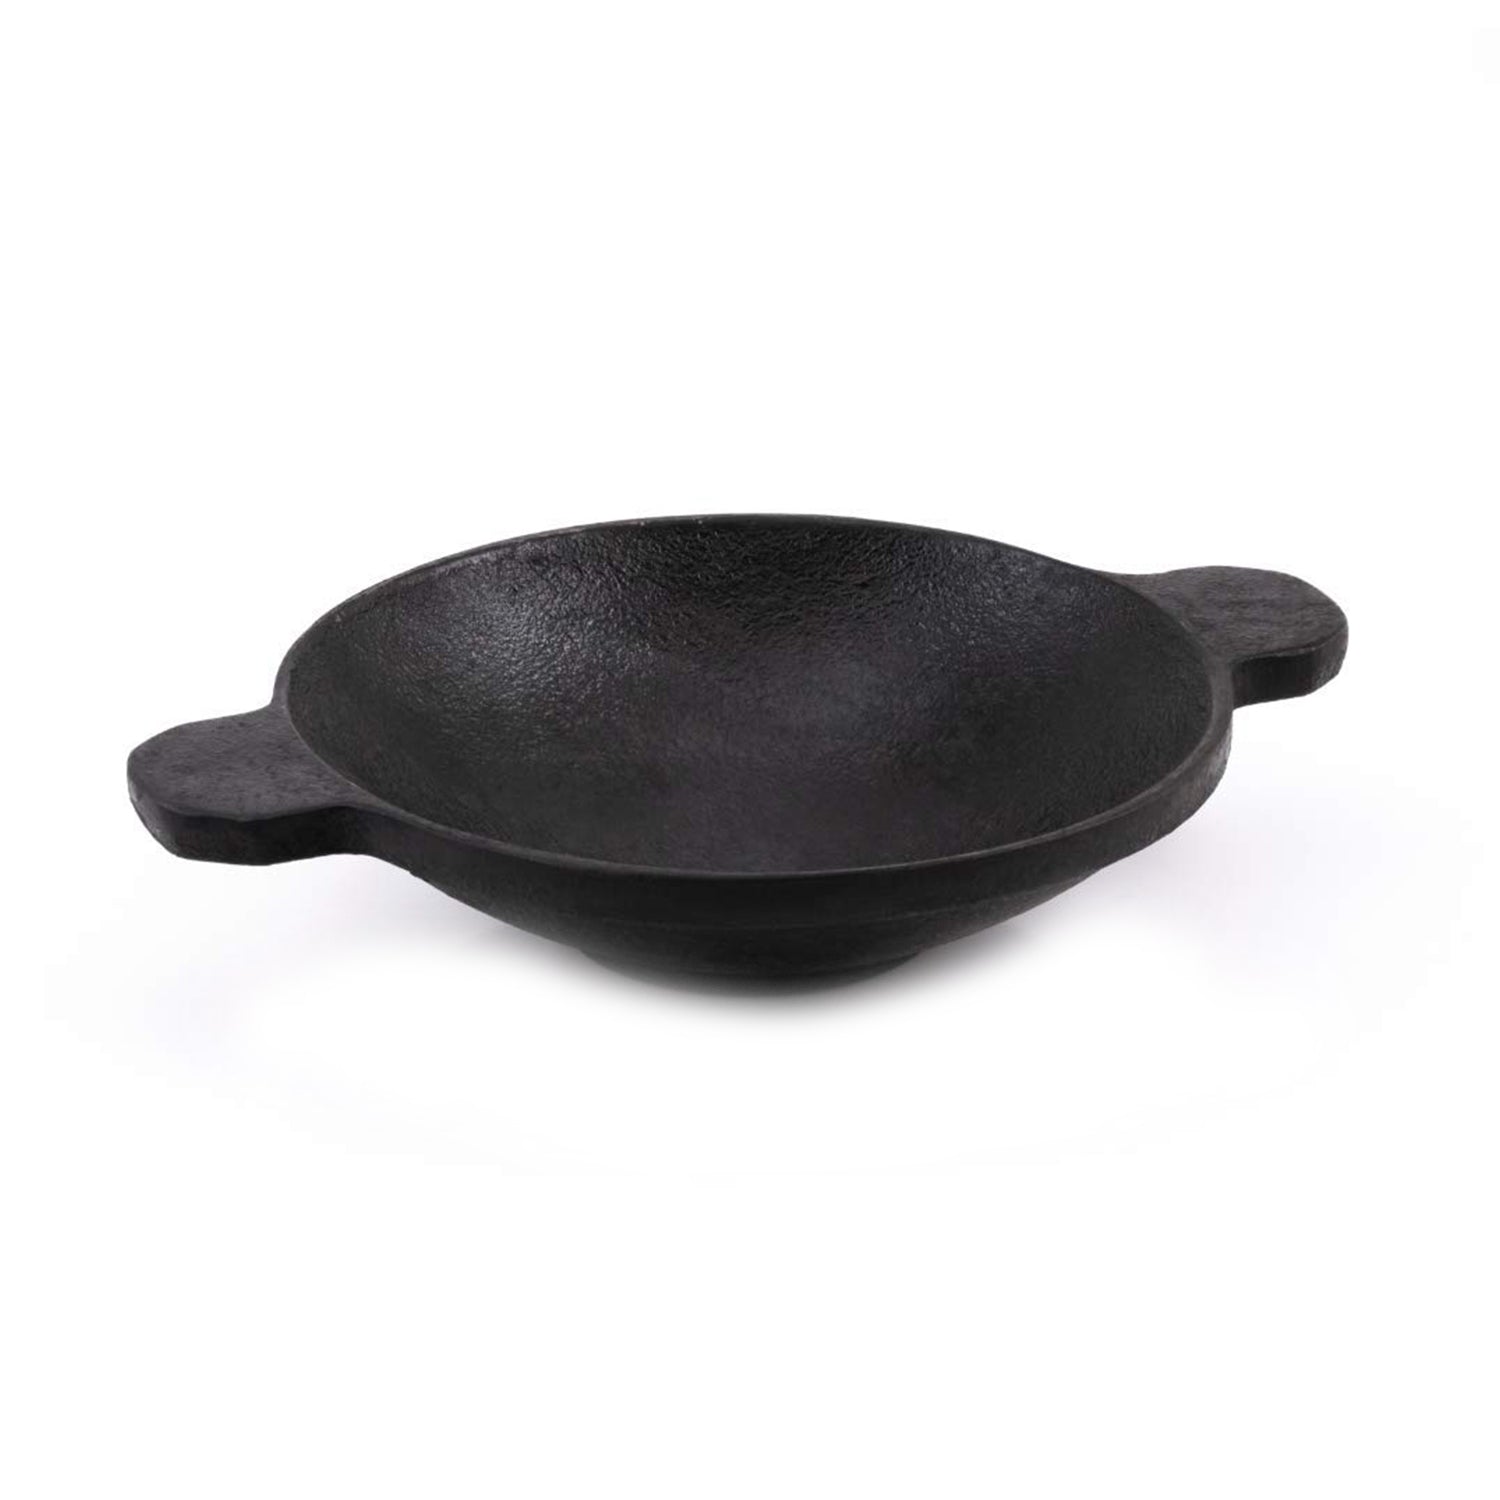 Cast Iron Appa Chatti with Lid / Appam pan For Kitchen use Pack of 1 Piece